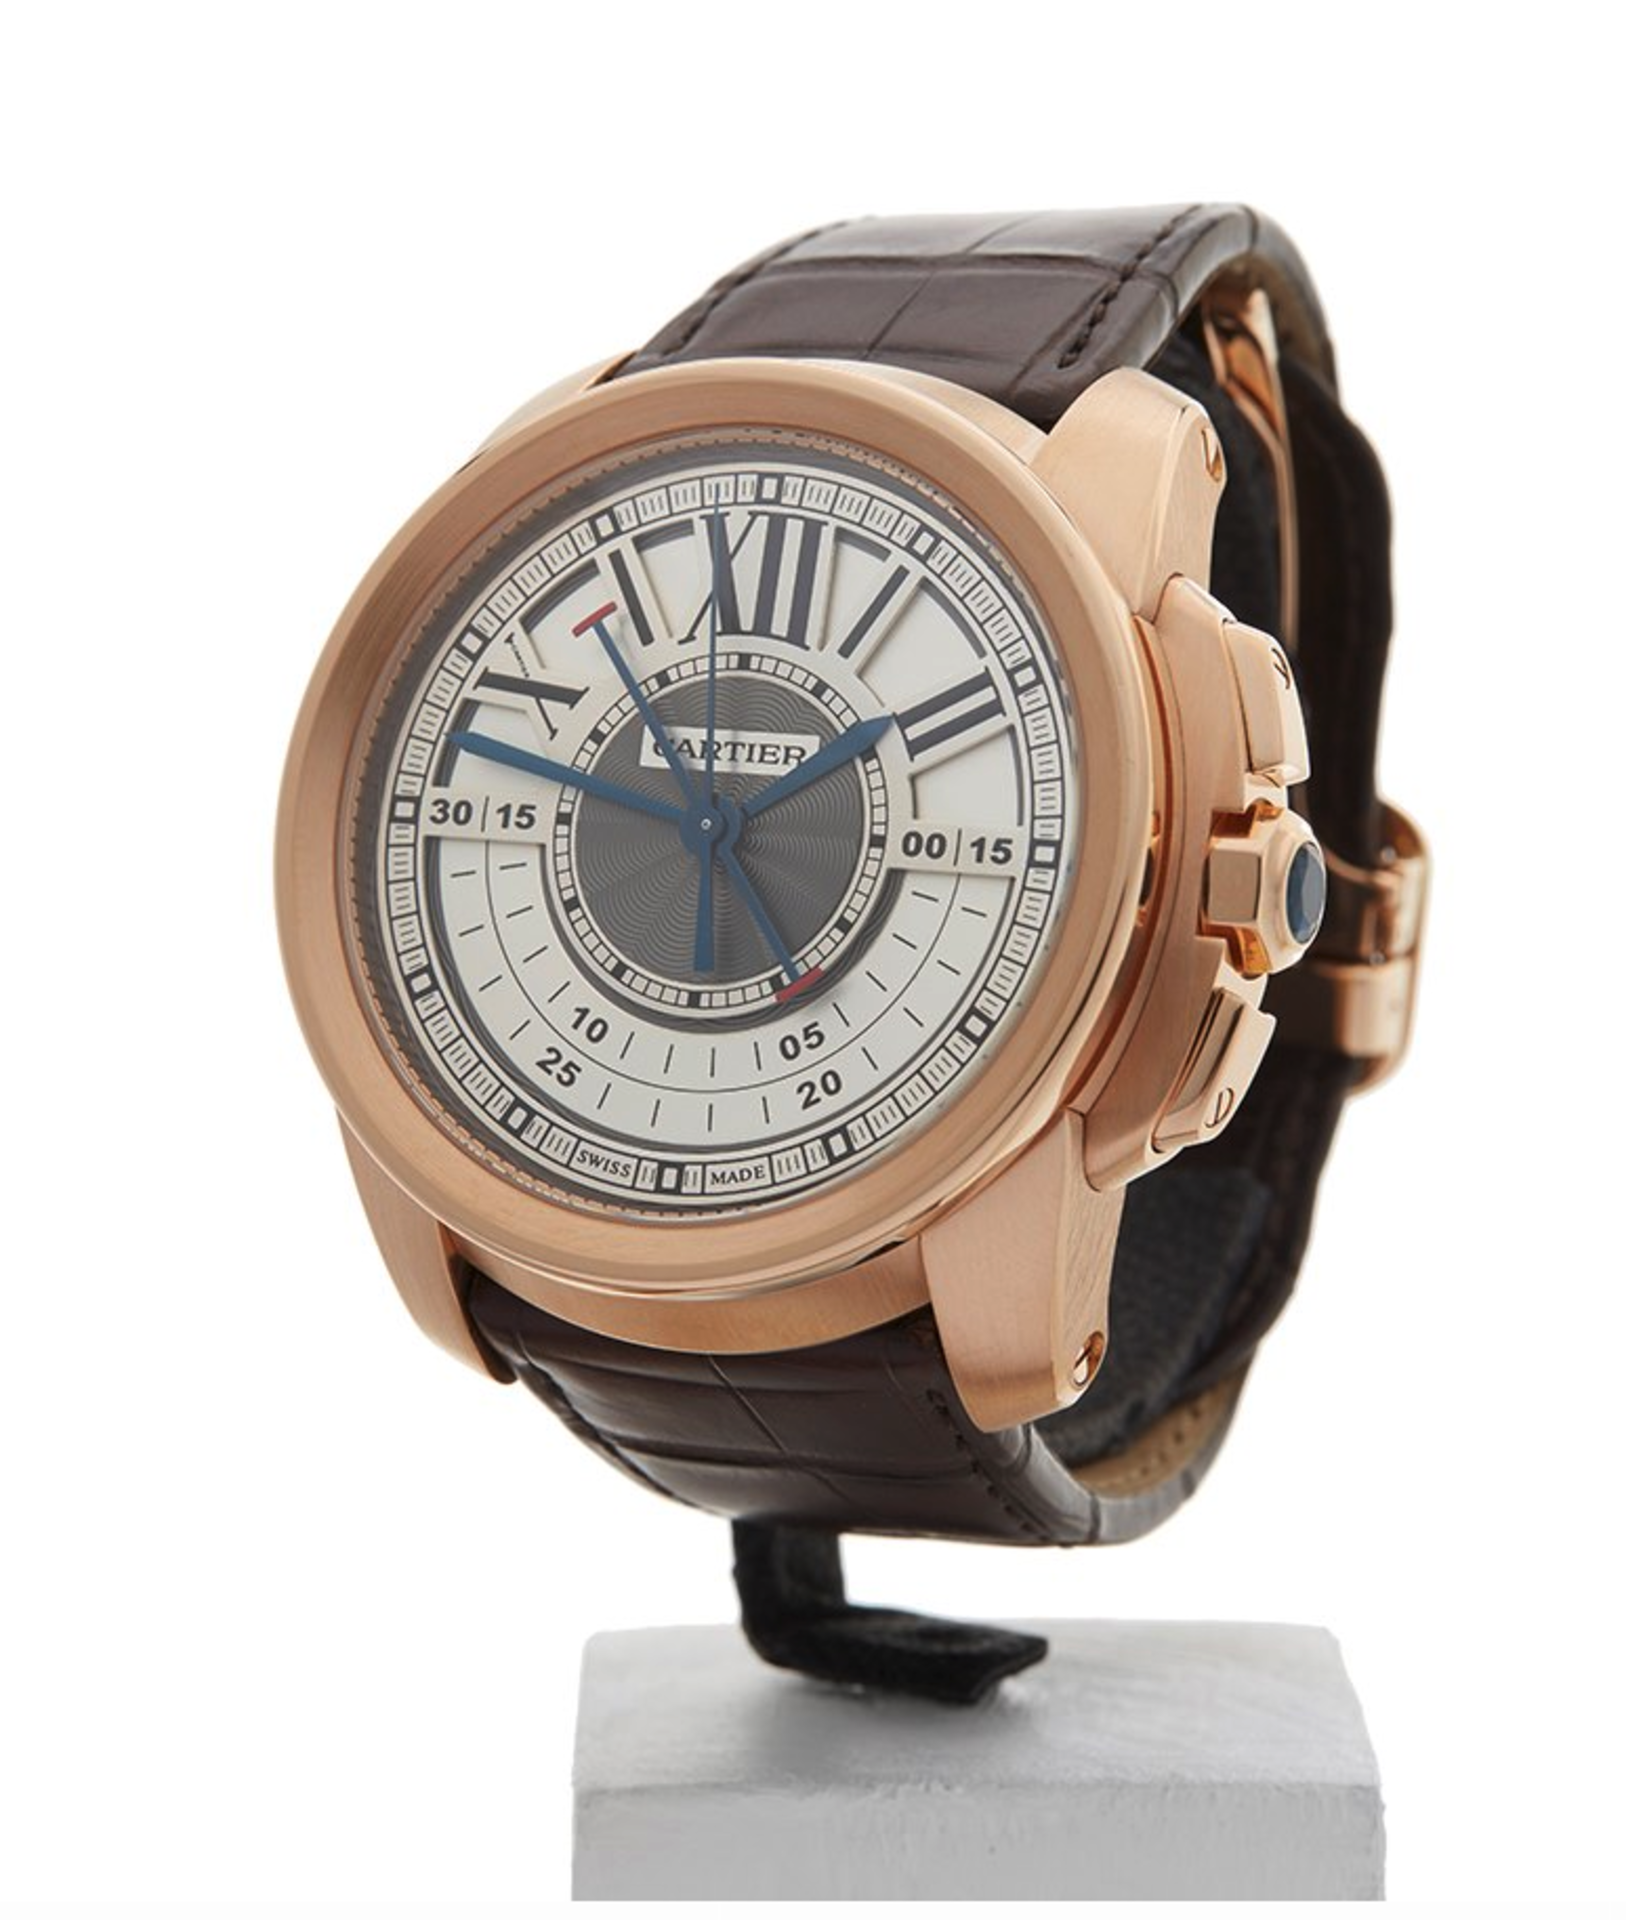 Cartier Calibre Central Chronograph 44mm 18K Rose Gold - 3242 or W7100004 - Image 5 of 9